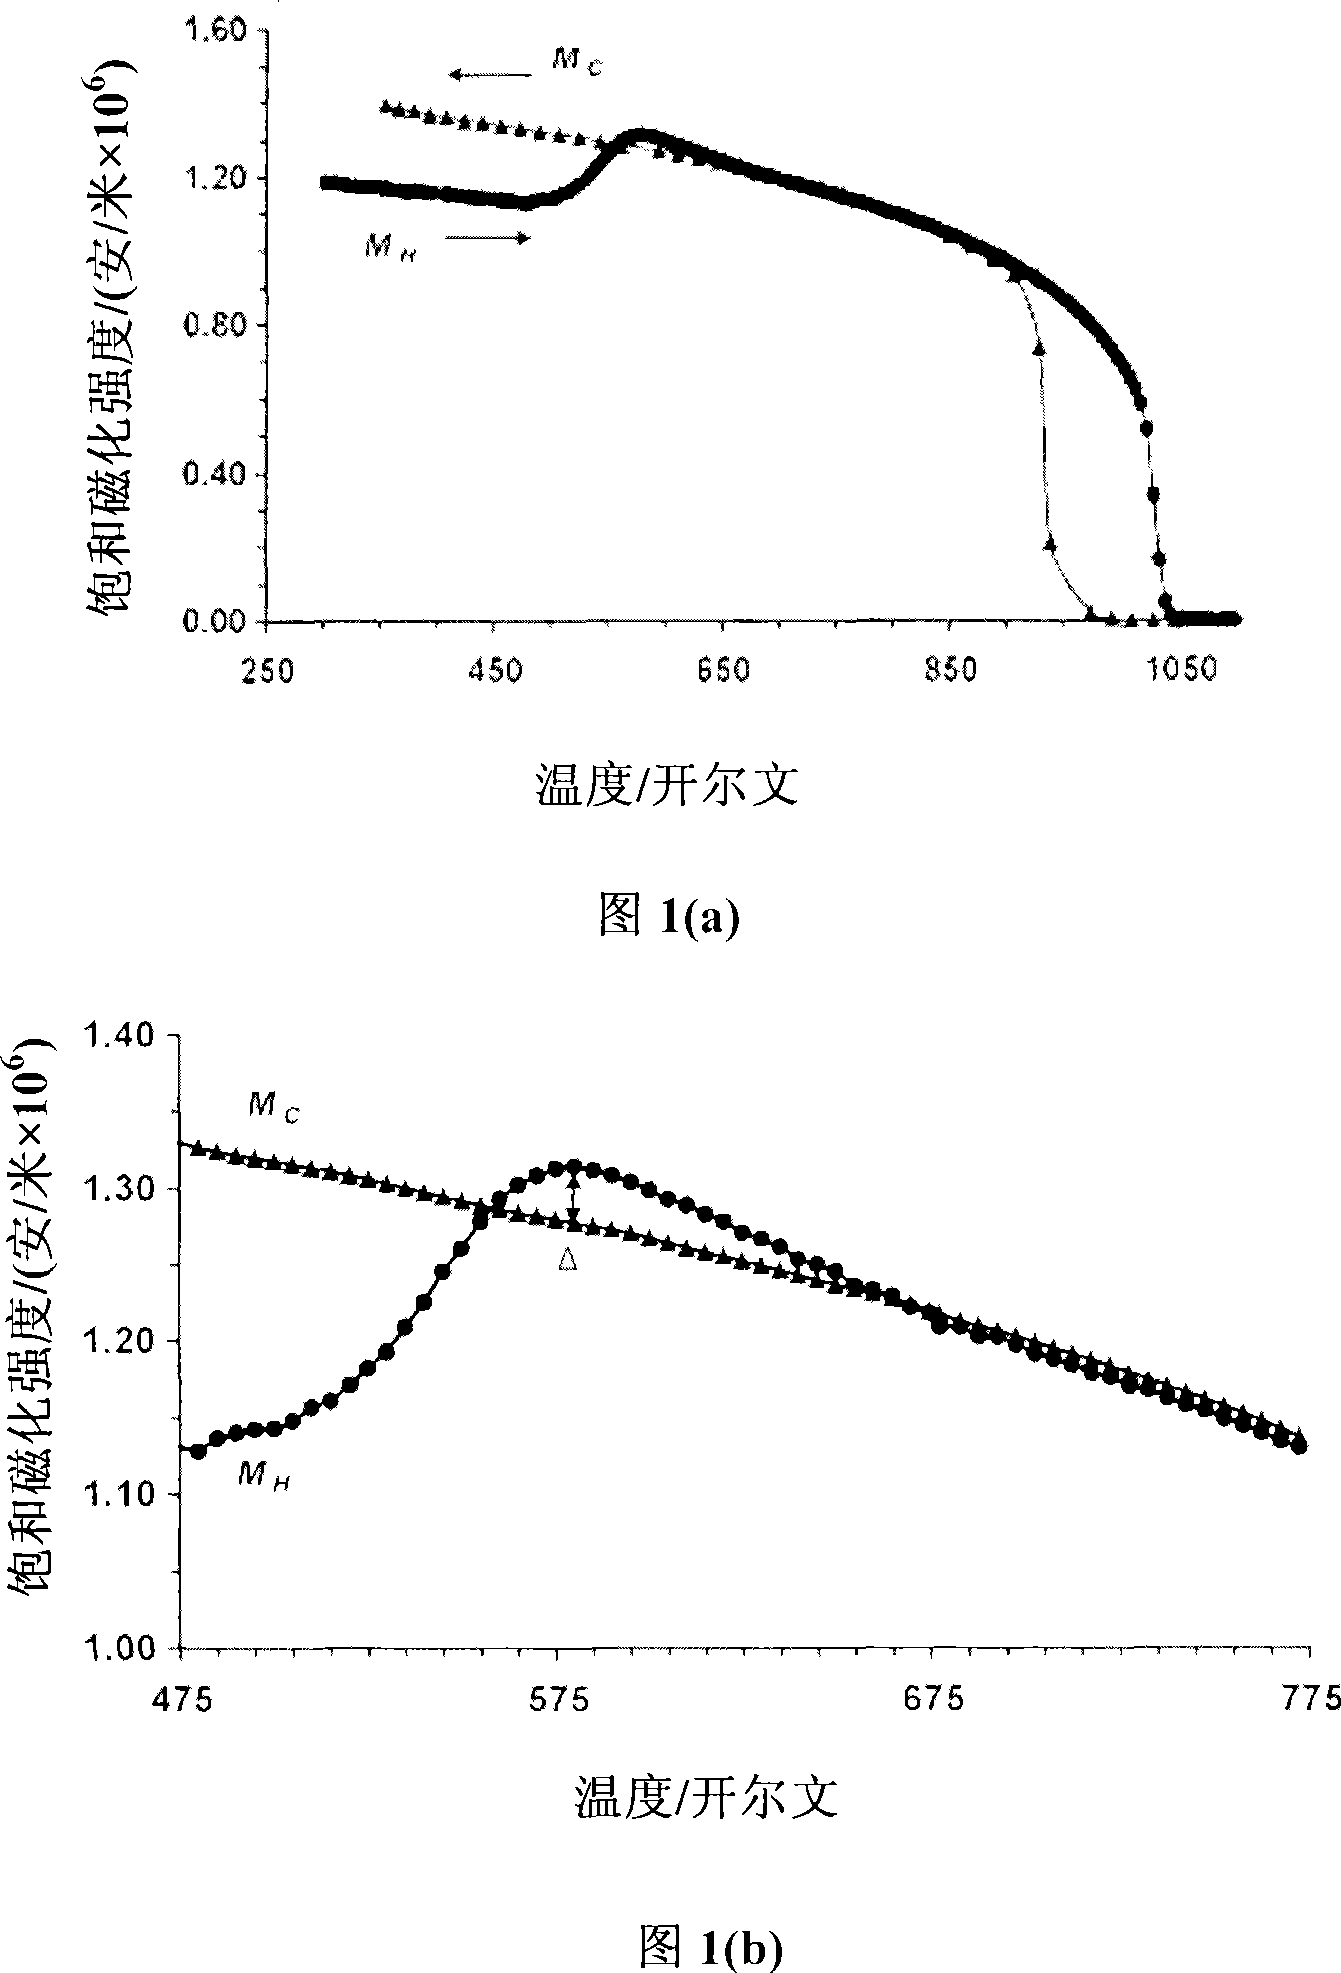 Measuring method for thermostability of residual austenite in steel